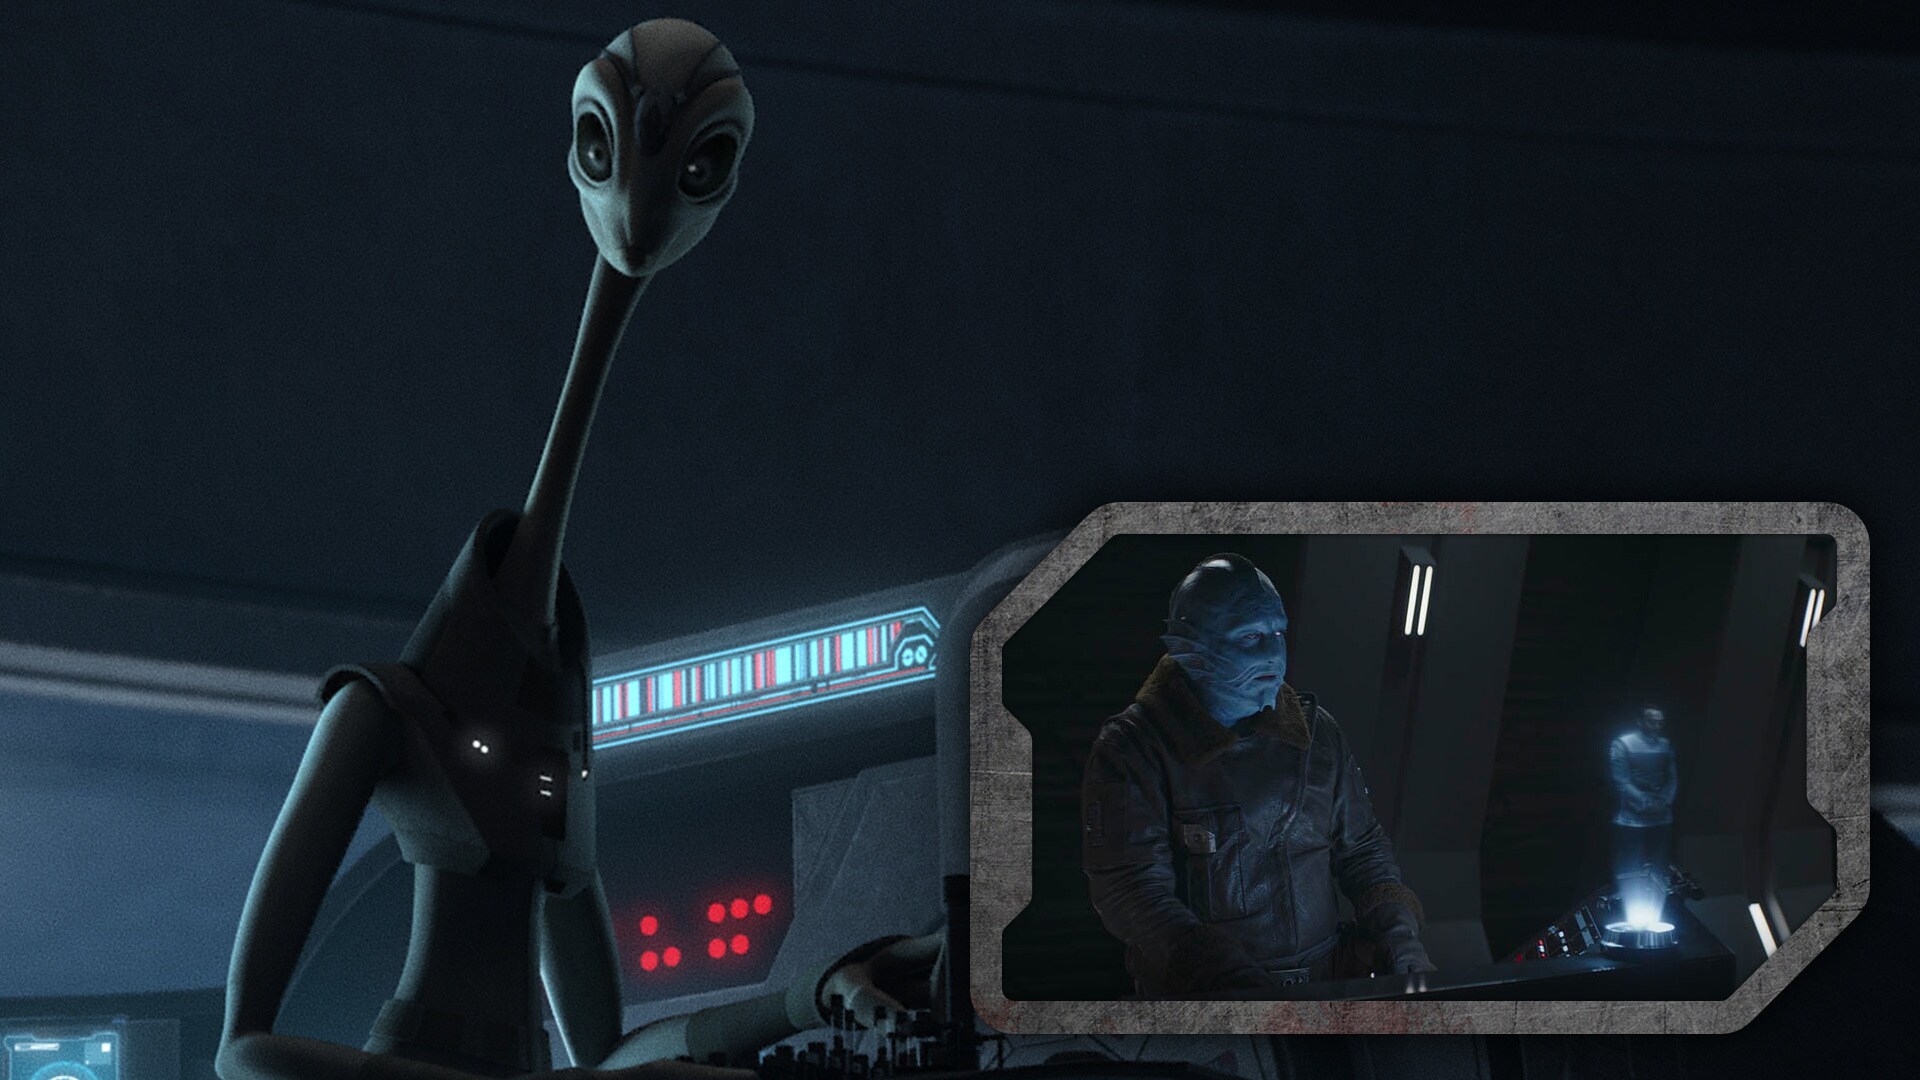 The mysterious term M-count, alluding to the amount of midi-chlorians in a being's blood, was first uttered by Dr. Pershing in Chapter 12 of The Mandalorian.